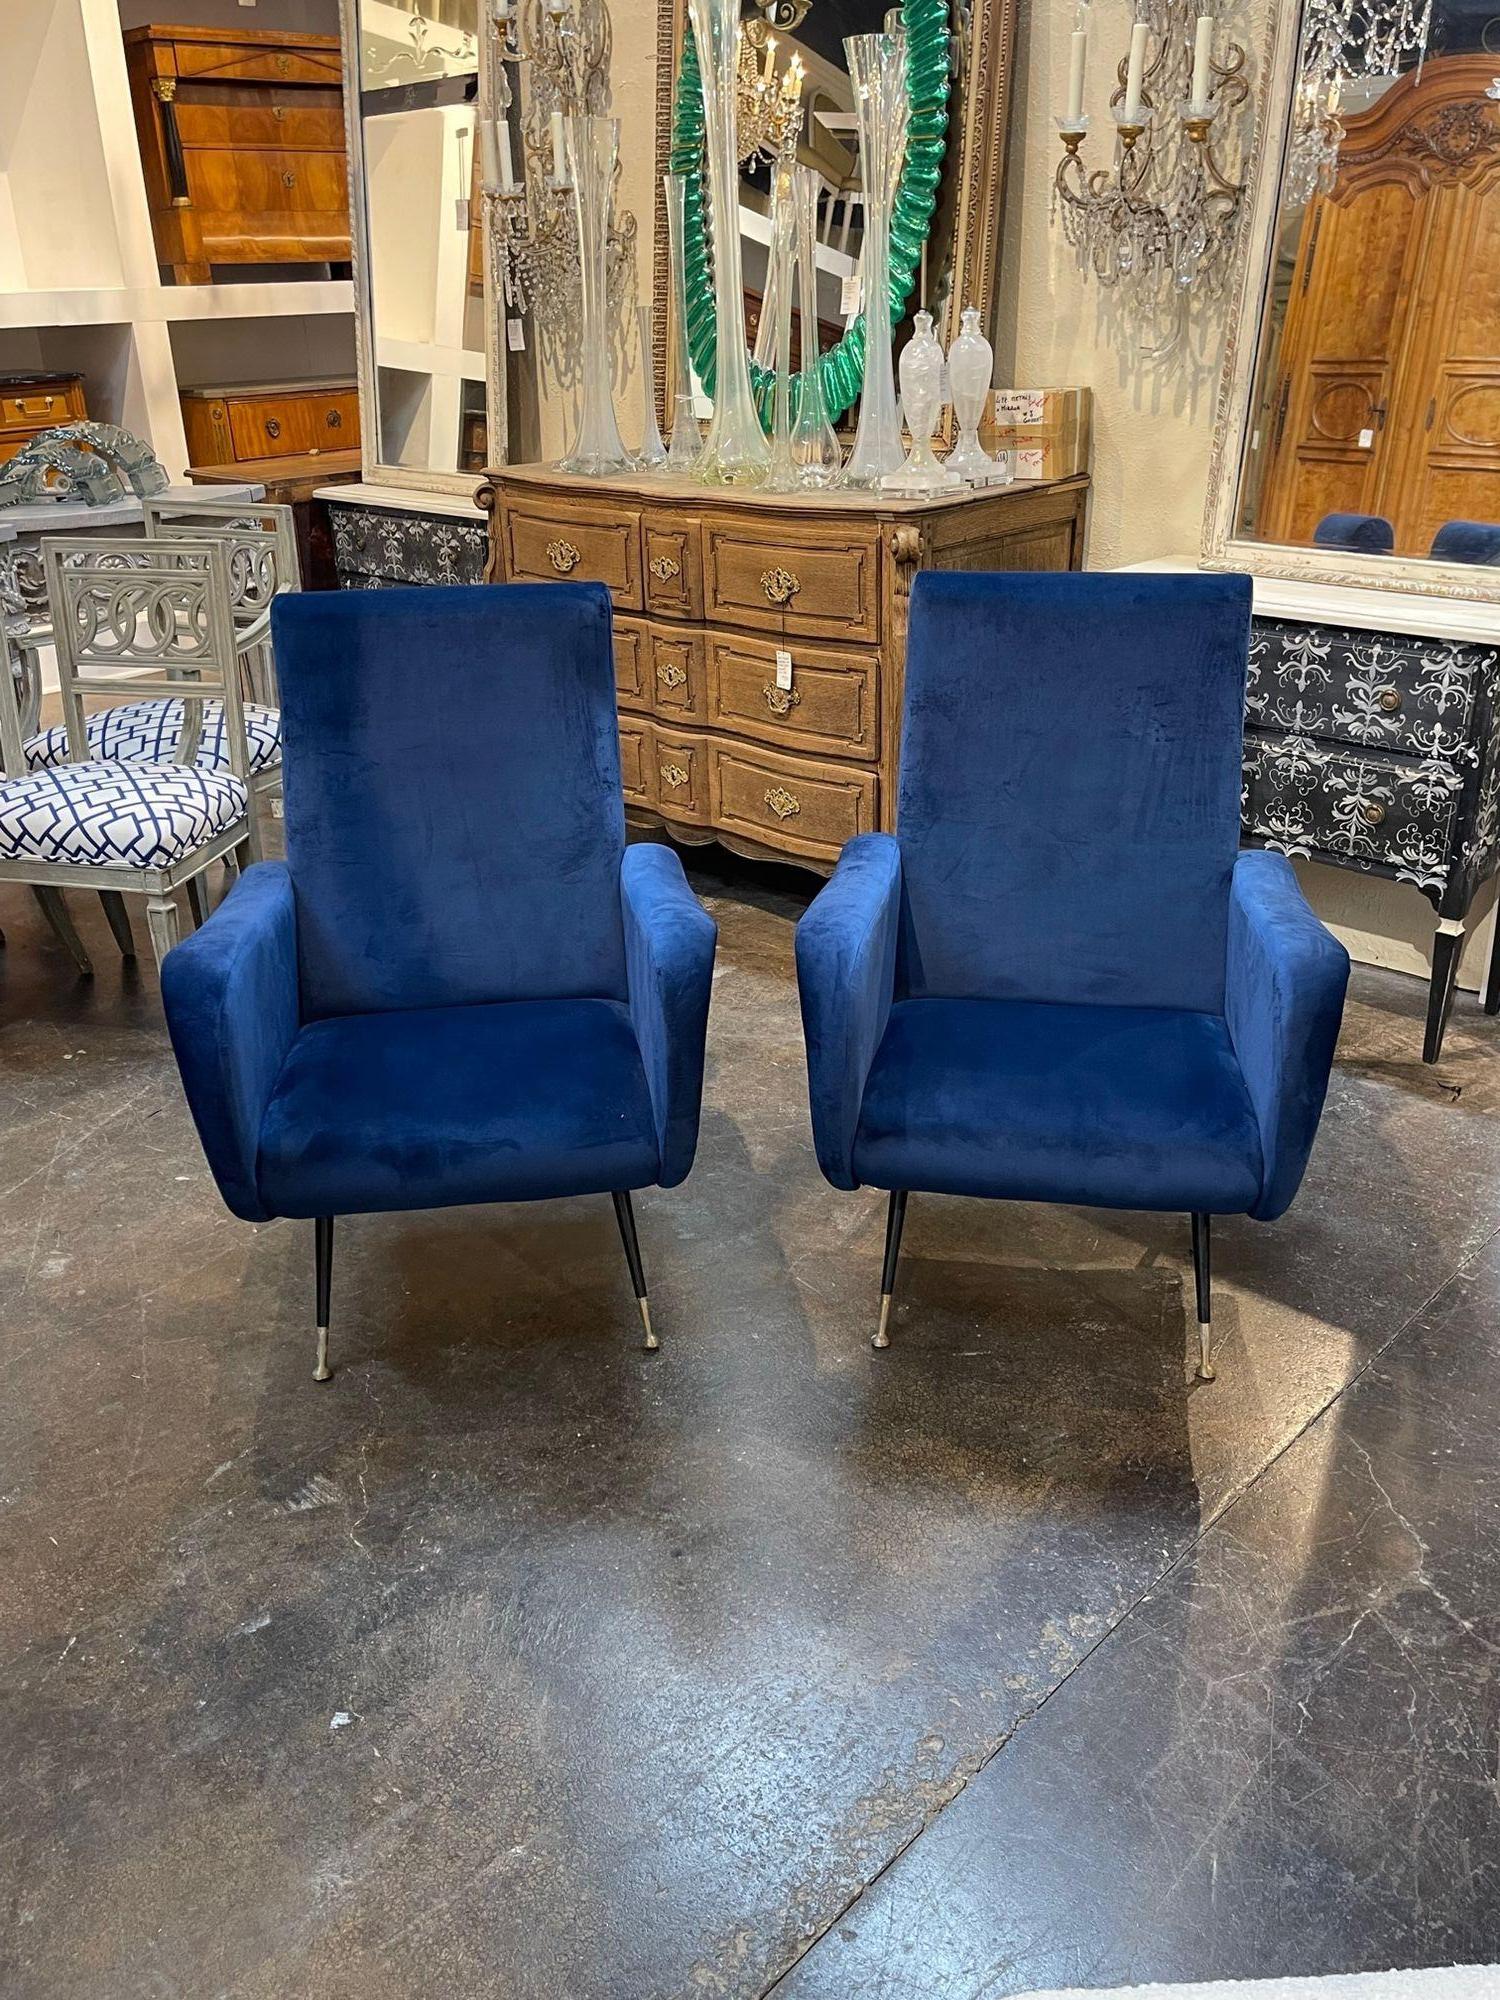 Fine pair of Italian Mid-Century Navy Gio Ponti style chairs upholstered in a plush velvet. A favorite of the designers. Very nice!!